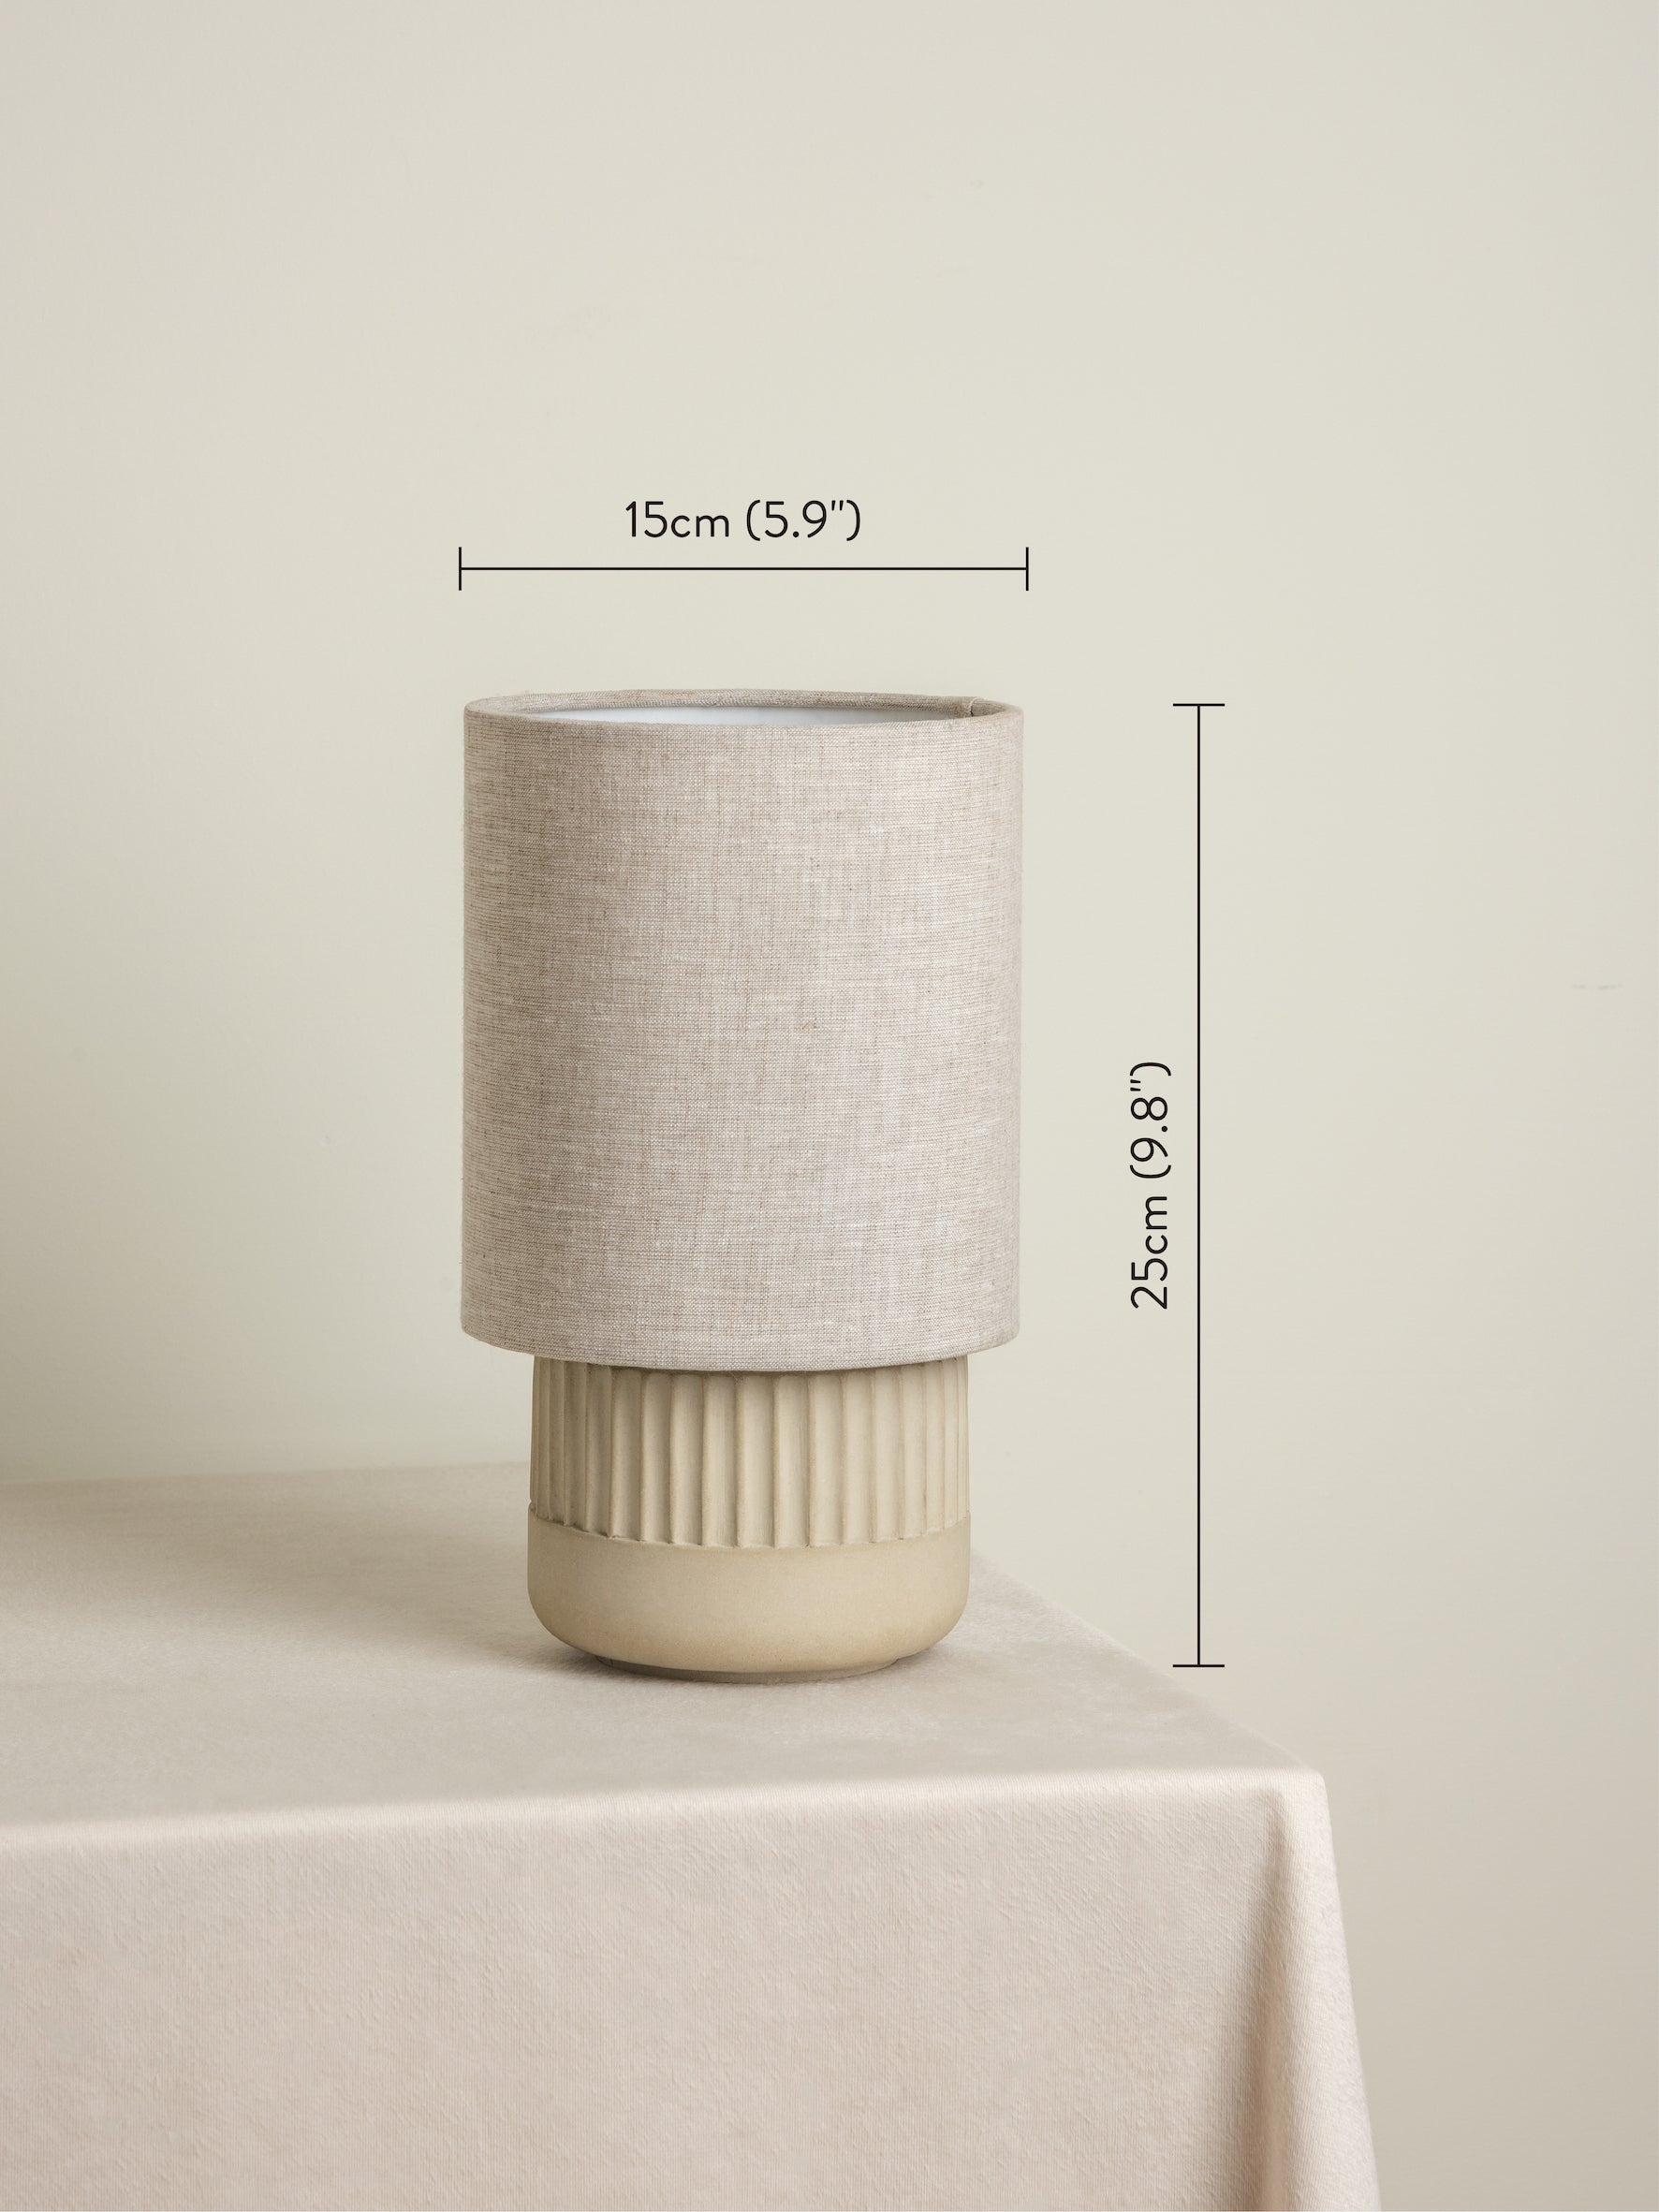 Enza - warm white ribbed concrete table lamp | Table Lamp | Lights & Lamps | UK